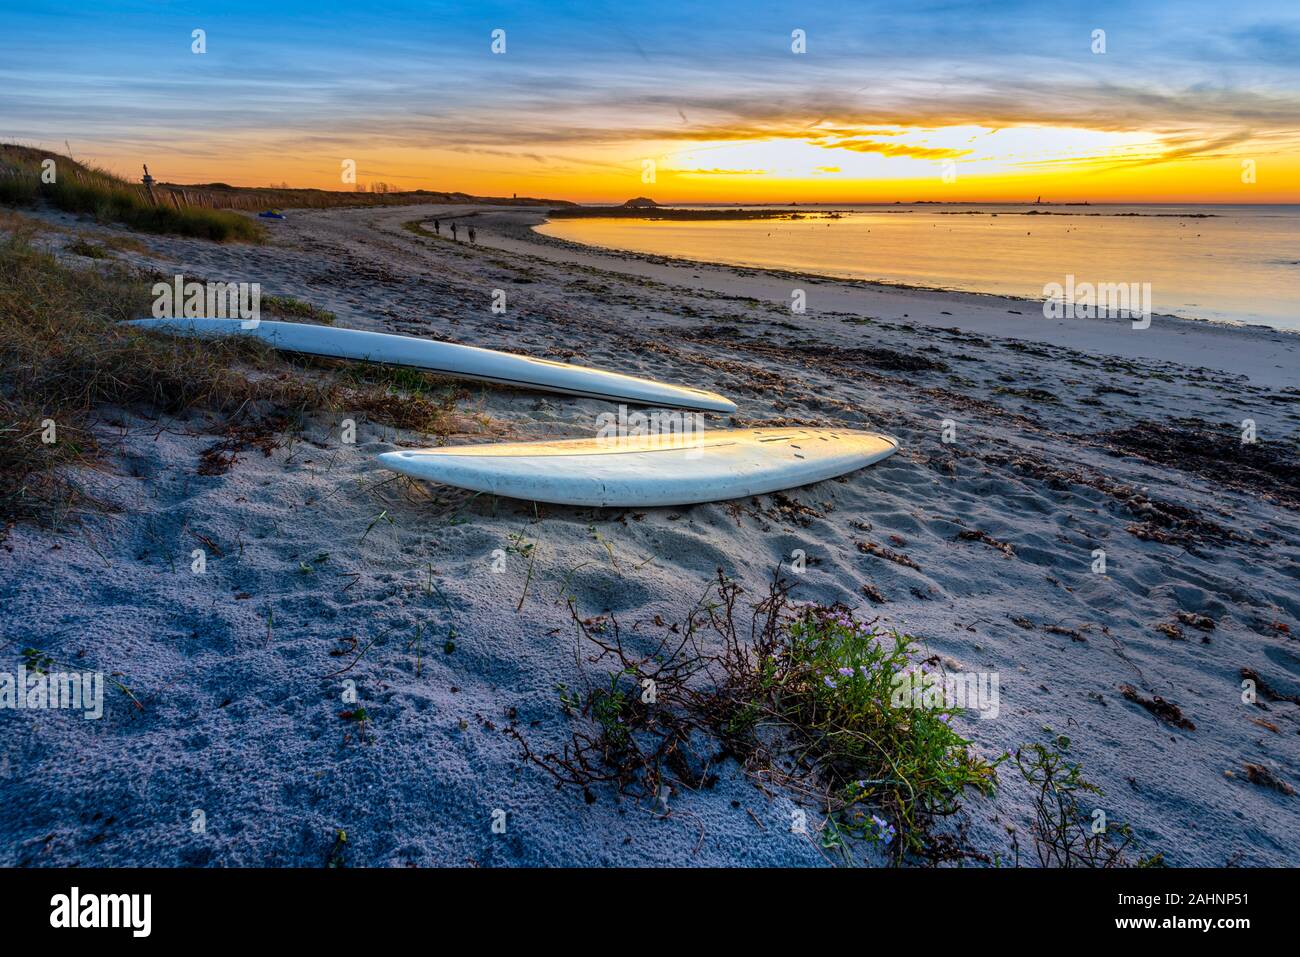 The sunrise in the beach in South of Hoedic Island in French Brittany, La Croix Port. Abandoned windsurfing boards are at foreground. Stock Photo